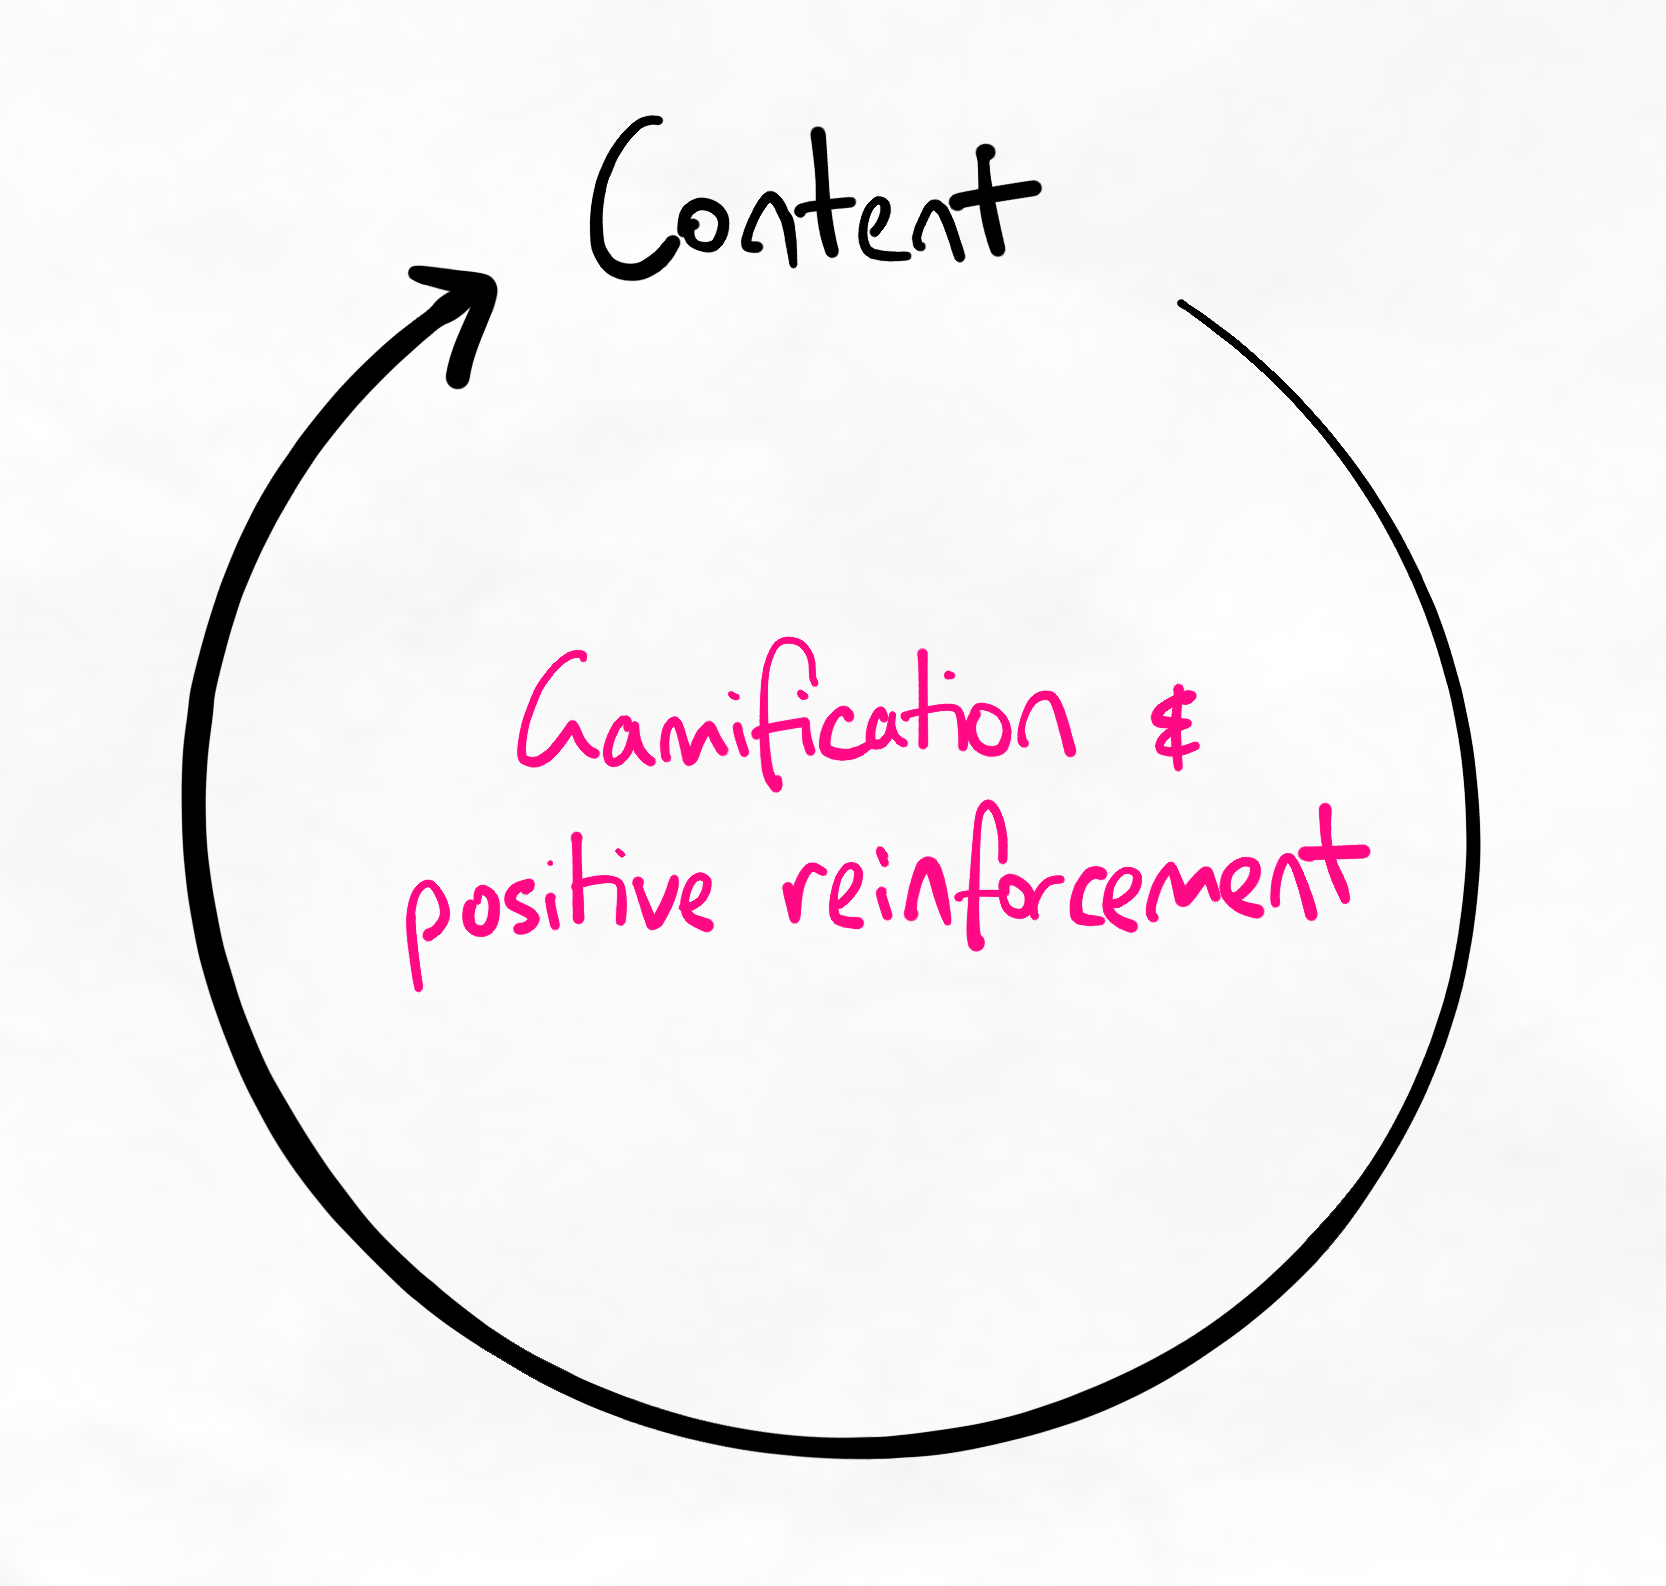 Content leading to more content as a cycle